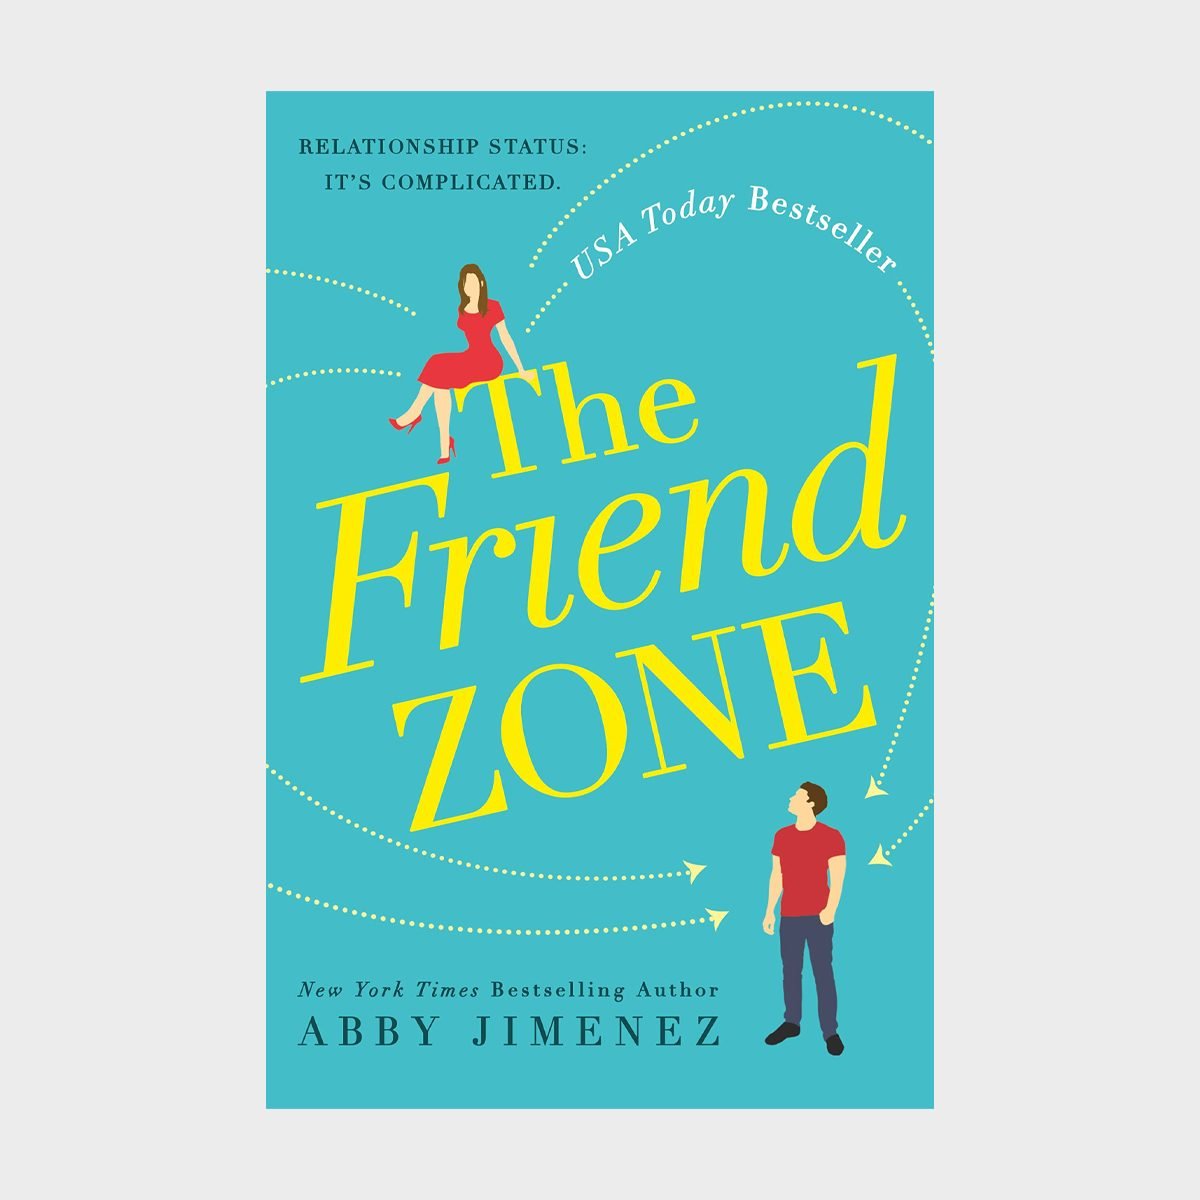 <p><strong>Series starter: </strong><a href="https://www.amazon.com/Friend-Zone-Abby-Jimenez/dp/1538715600" rel="noopener noreferrer"><em>The Friend Zone</em></a></p> <p><strong>What you're in for: </strong>Laugh-out-loud banter and dual point-of-view storytelling</p> <p>Abby Jimenez's four-book series can be read as stand-alone romance novels, but they each take place within the same world and thus feature familiar characters you've already met. If you're someone who enjoys <a href="https://www.rd.com/list/romantic-movies/" rel="noopener noreferrer">romantic movies</a>, this series is for you. The first book, 2019's <em>The Friend Zone</em>, follows Kristen and Josh. Kristen, a sarcastic, smart entrepreneur, likes no strings attached when it comes to men. Josh is instantly drawn to her charisma, but Kristen insists they can only be friends. She knows she needs surgery that will make it impossible for her to have kids, and Josh has expressed interest in having children. But as their chemistry grows, Kristen isn't sure she can stay away.</p> <p class="listicle-page__cta-button-shop"><a class="shop-btn" href="https://www.amazon.com/Friend-Zone-Abby-Jimenez/dp/1538715600">Shop Now</a></p>